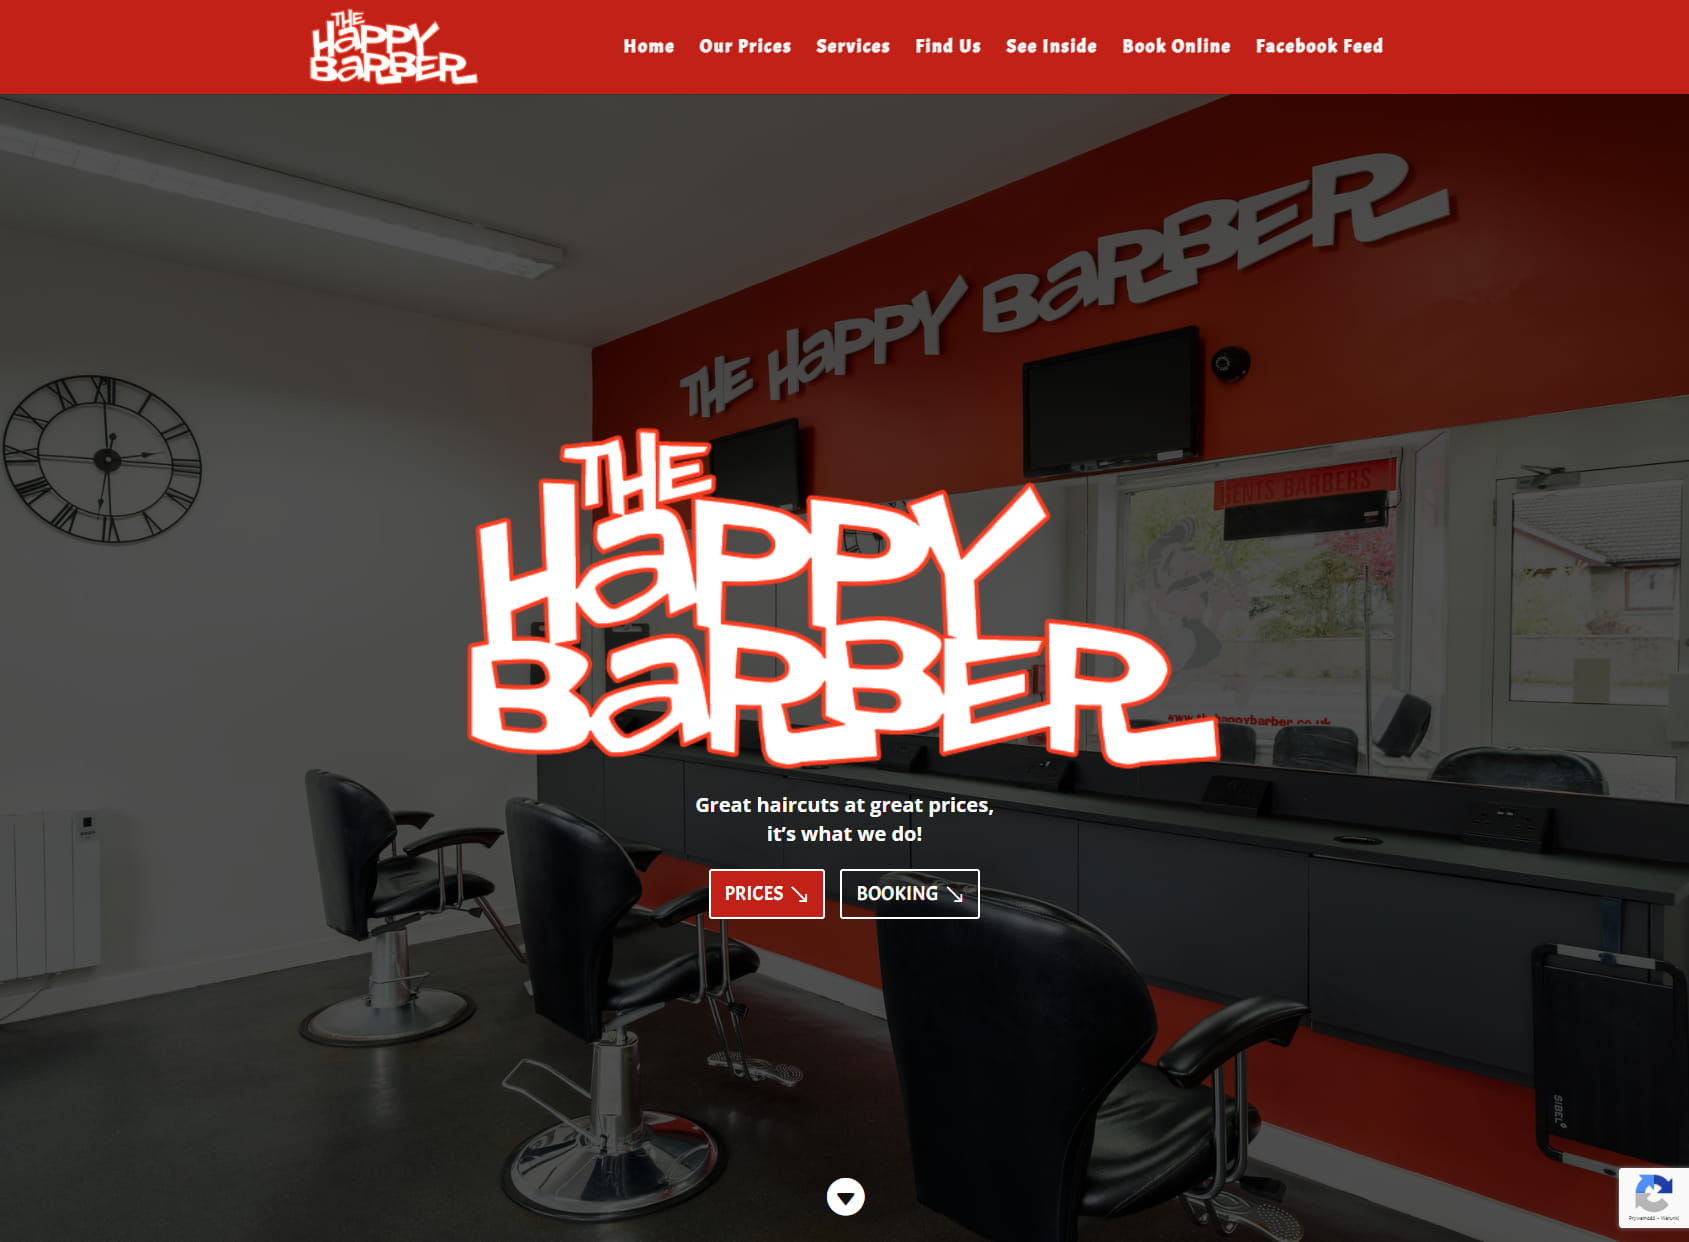 The Happy Barber